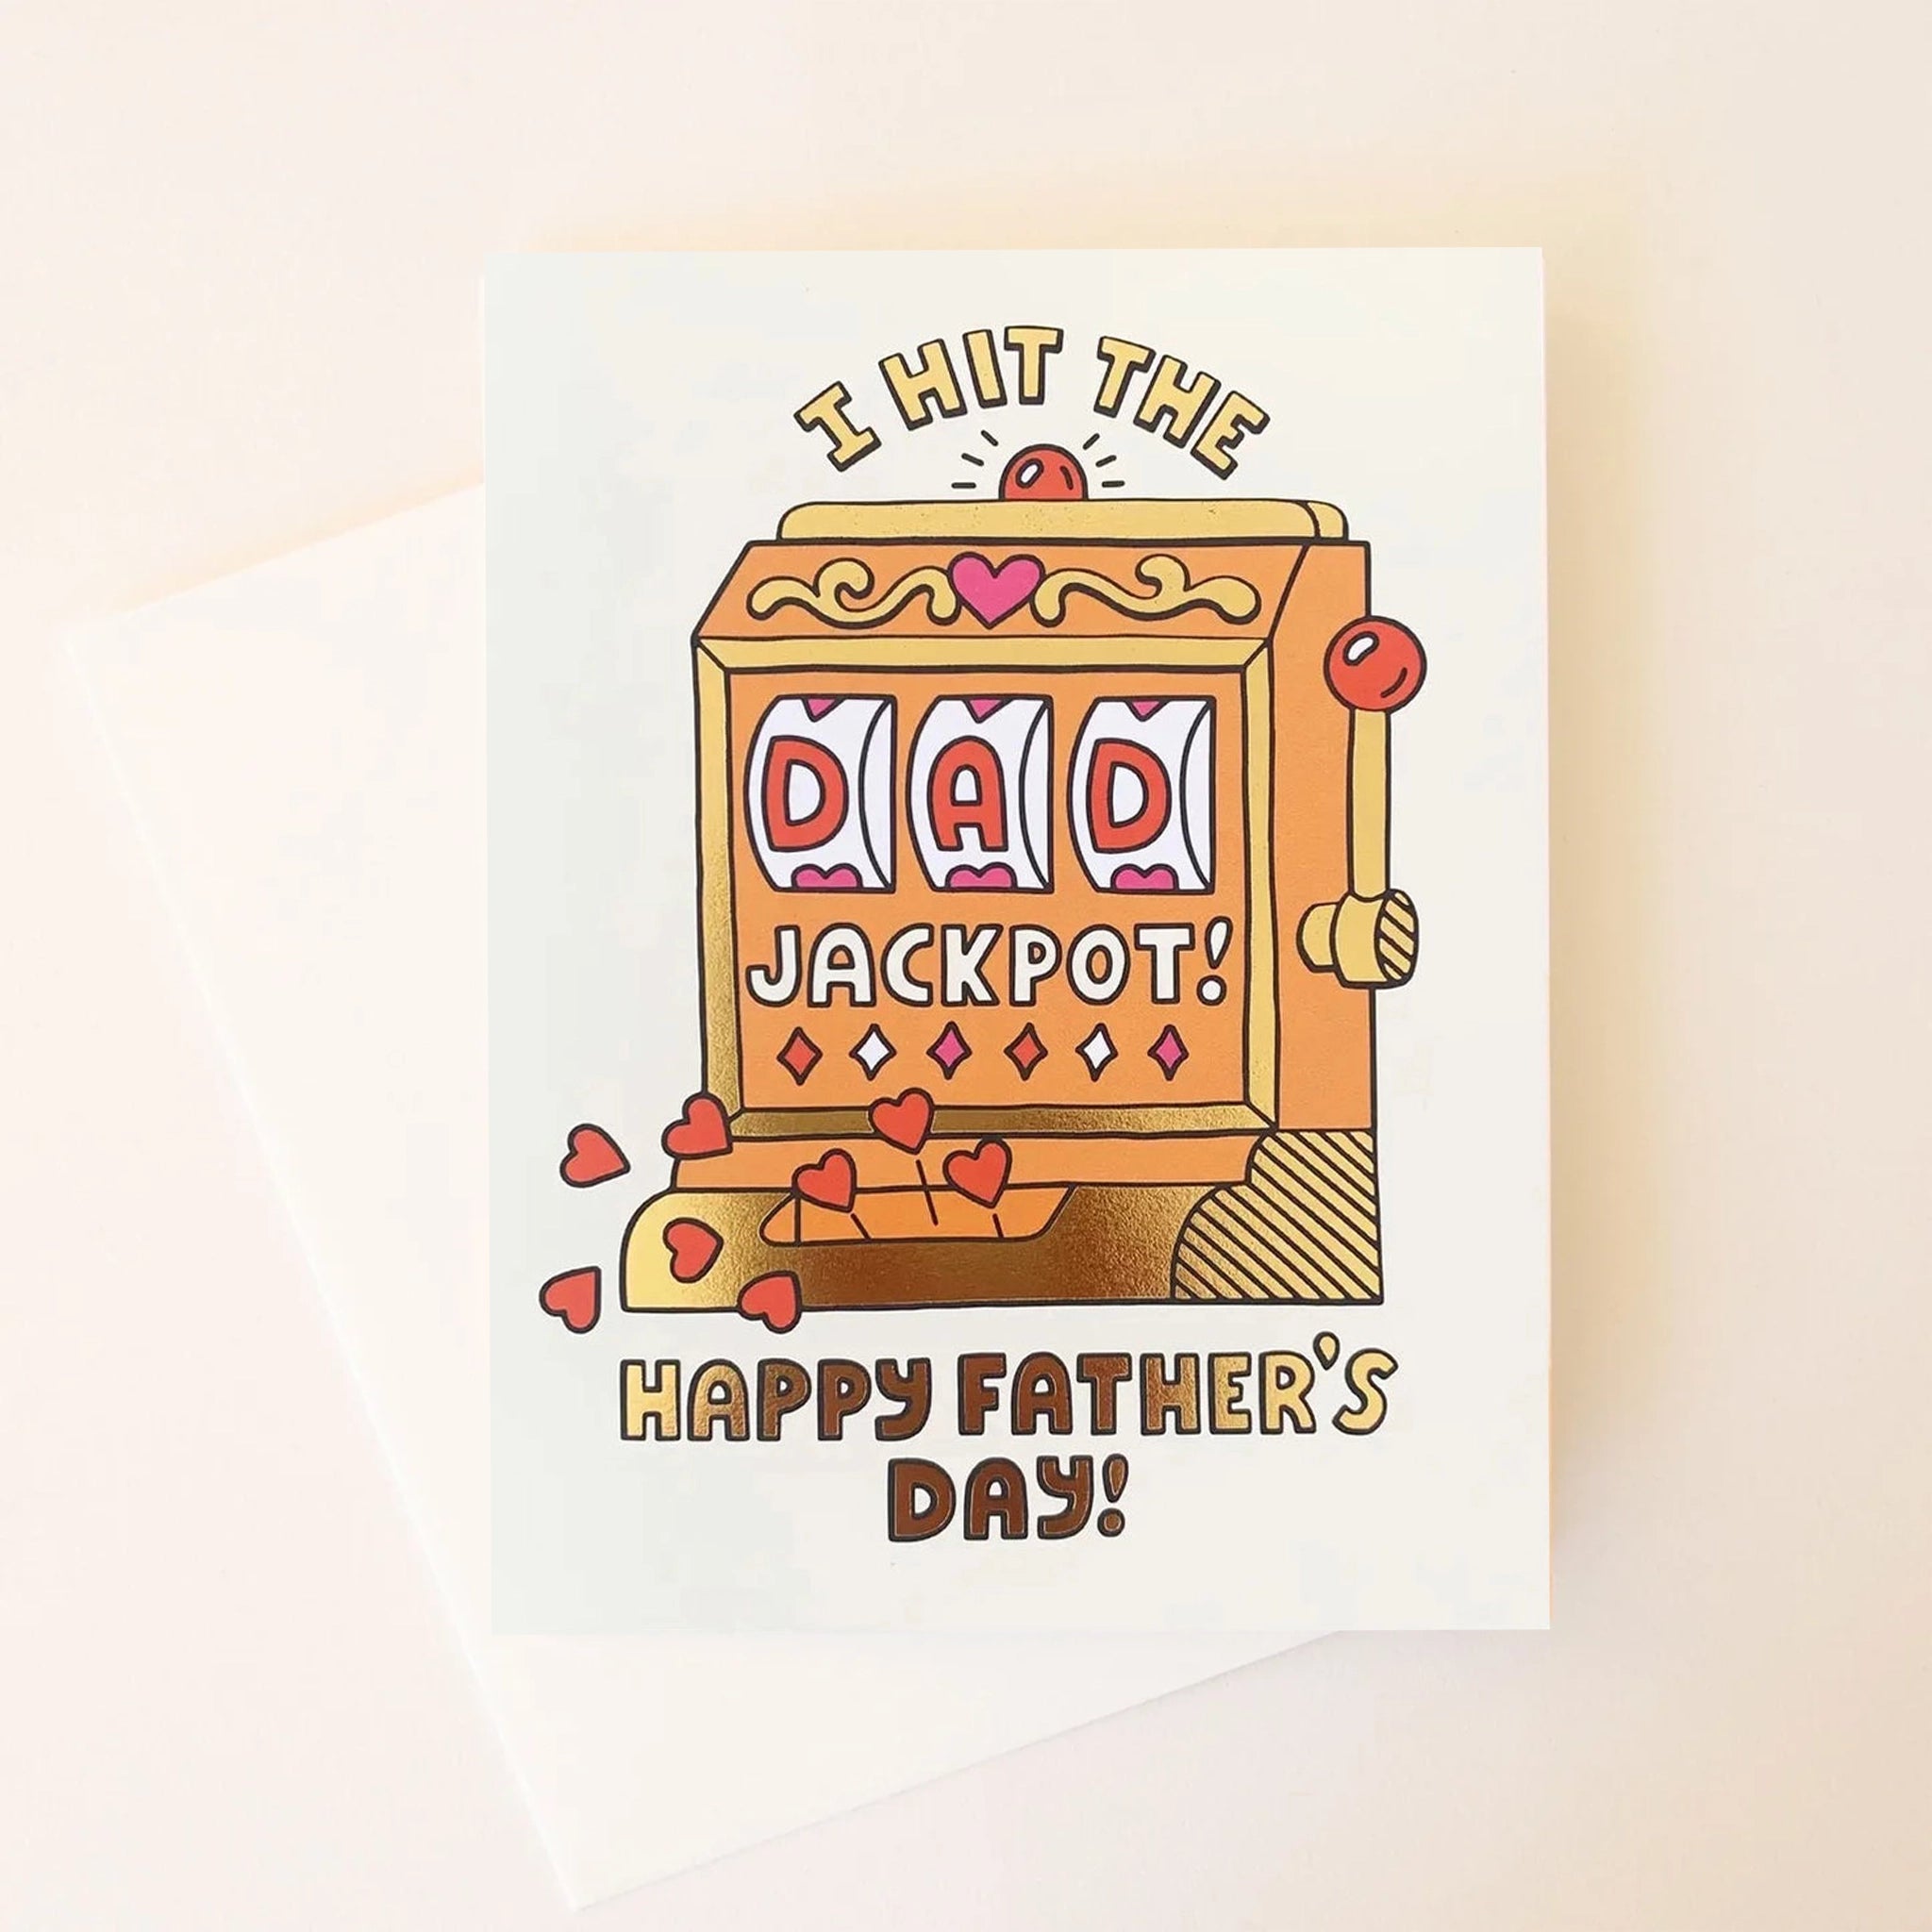 On a cream background is a white card with an orange and gold slot machine that's detailed with hearts and reads, "I hit the DAD jackpot! Happy Father's Day!". "DAD" is written in the slot machine as the winning numbers. Also included is a coordinating white envelope.